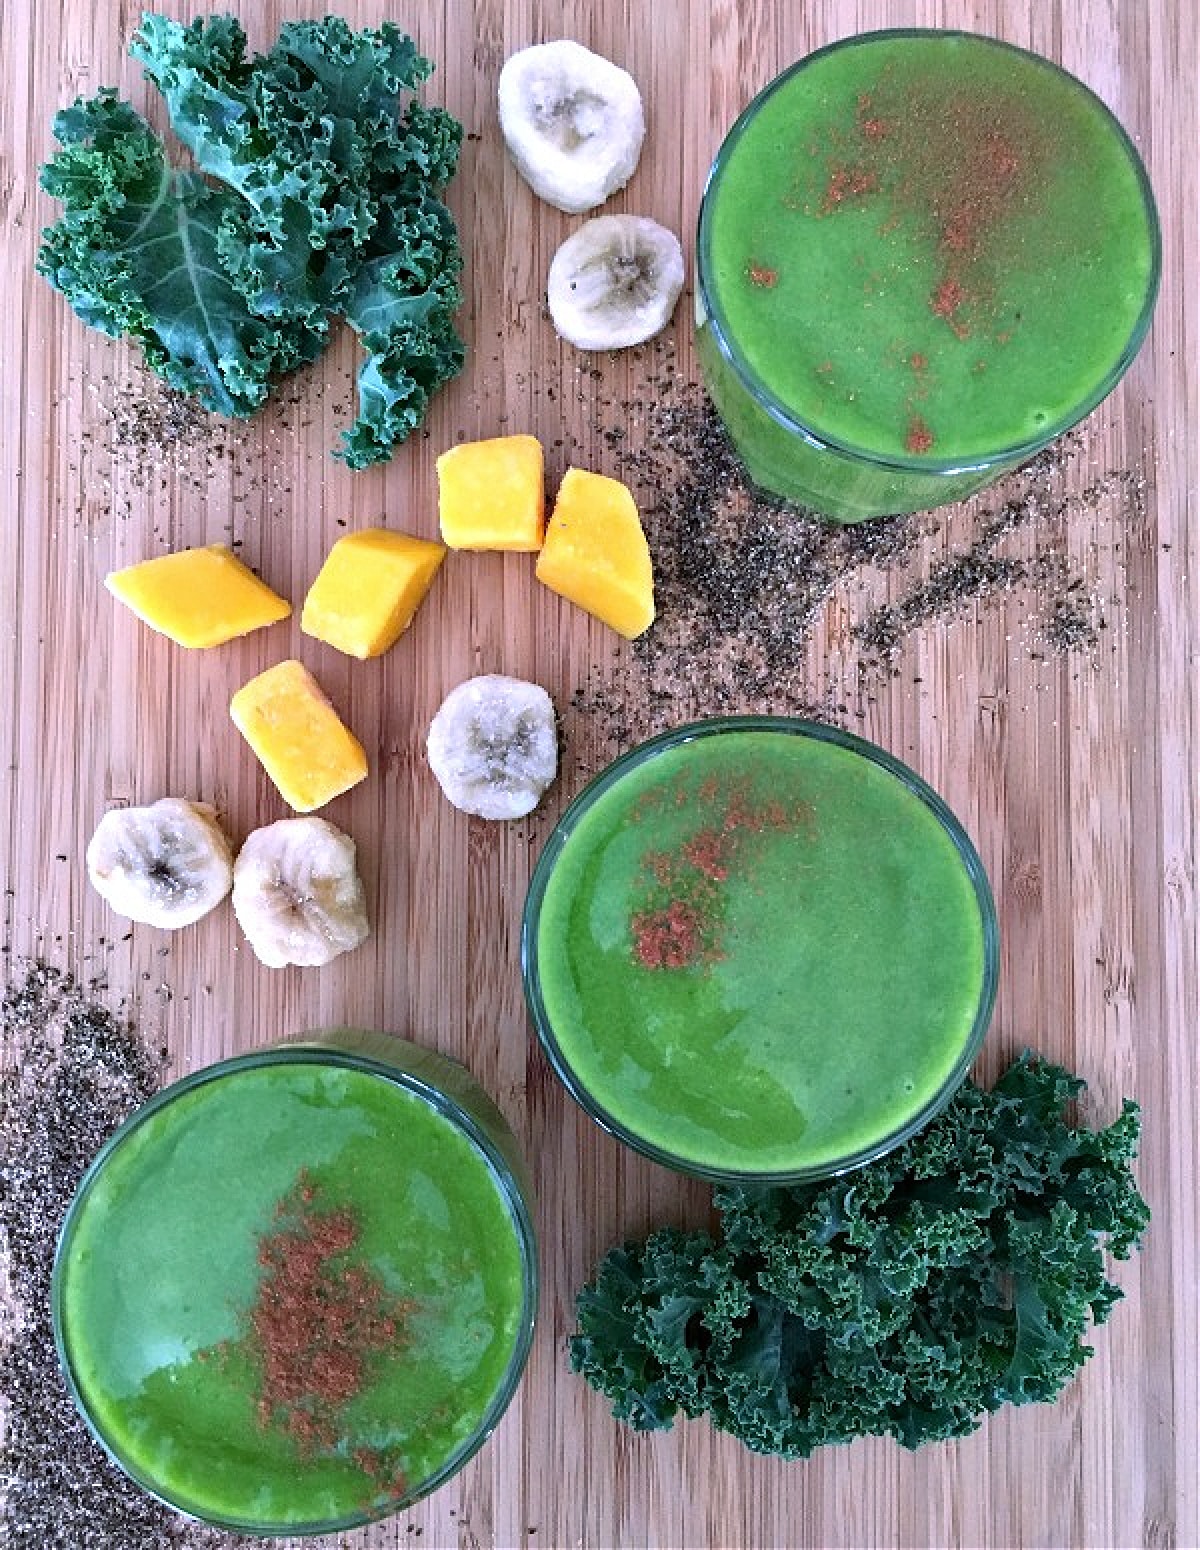 Overhead view of three glasses of green smoothie on a bamboo board, surrounded by ingredients in the smoothies: frozen banana slices, frozen mango, chia seeds, and fresh kale leaves.